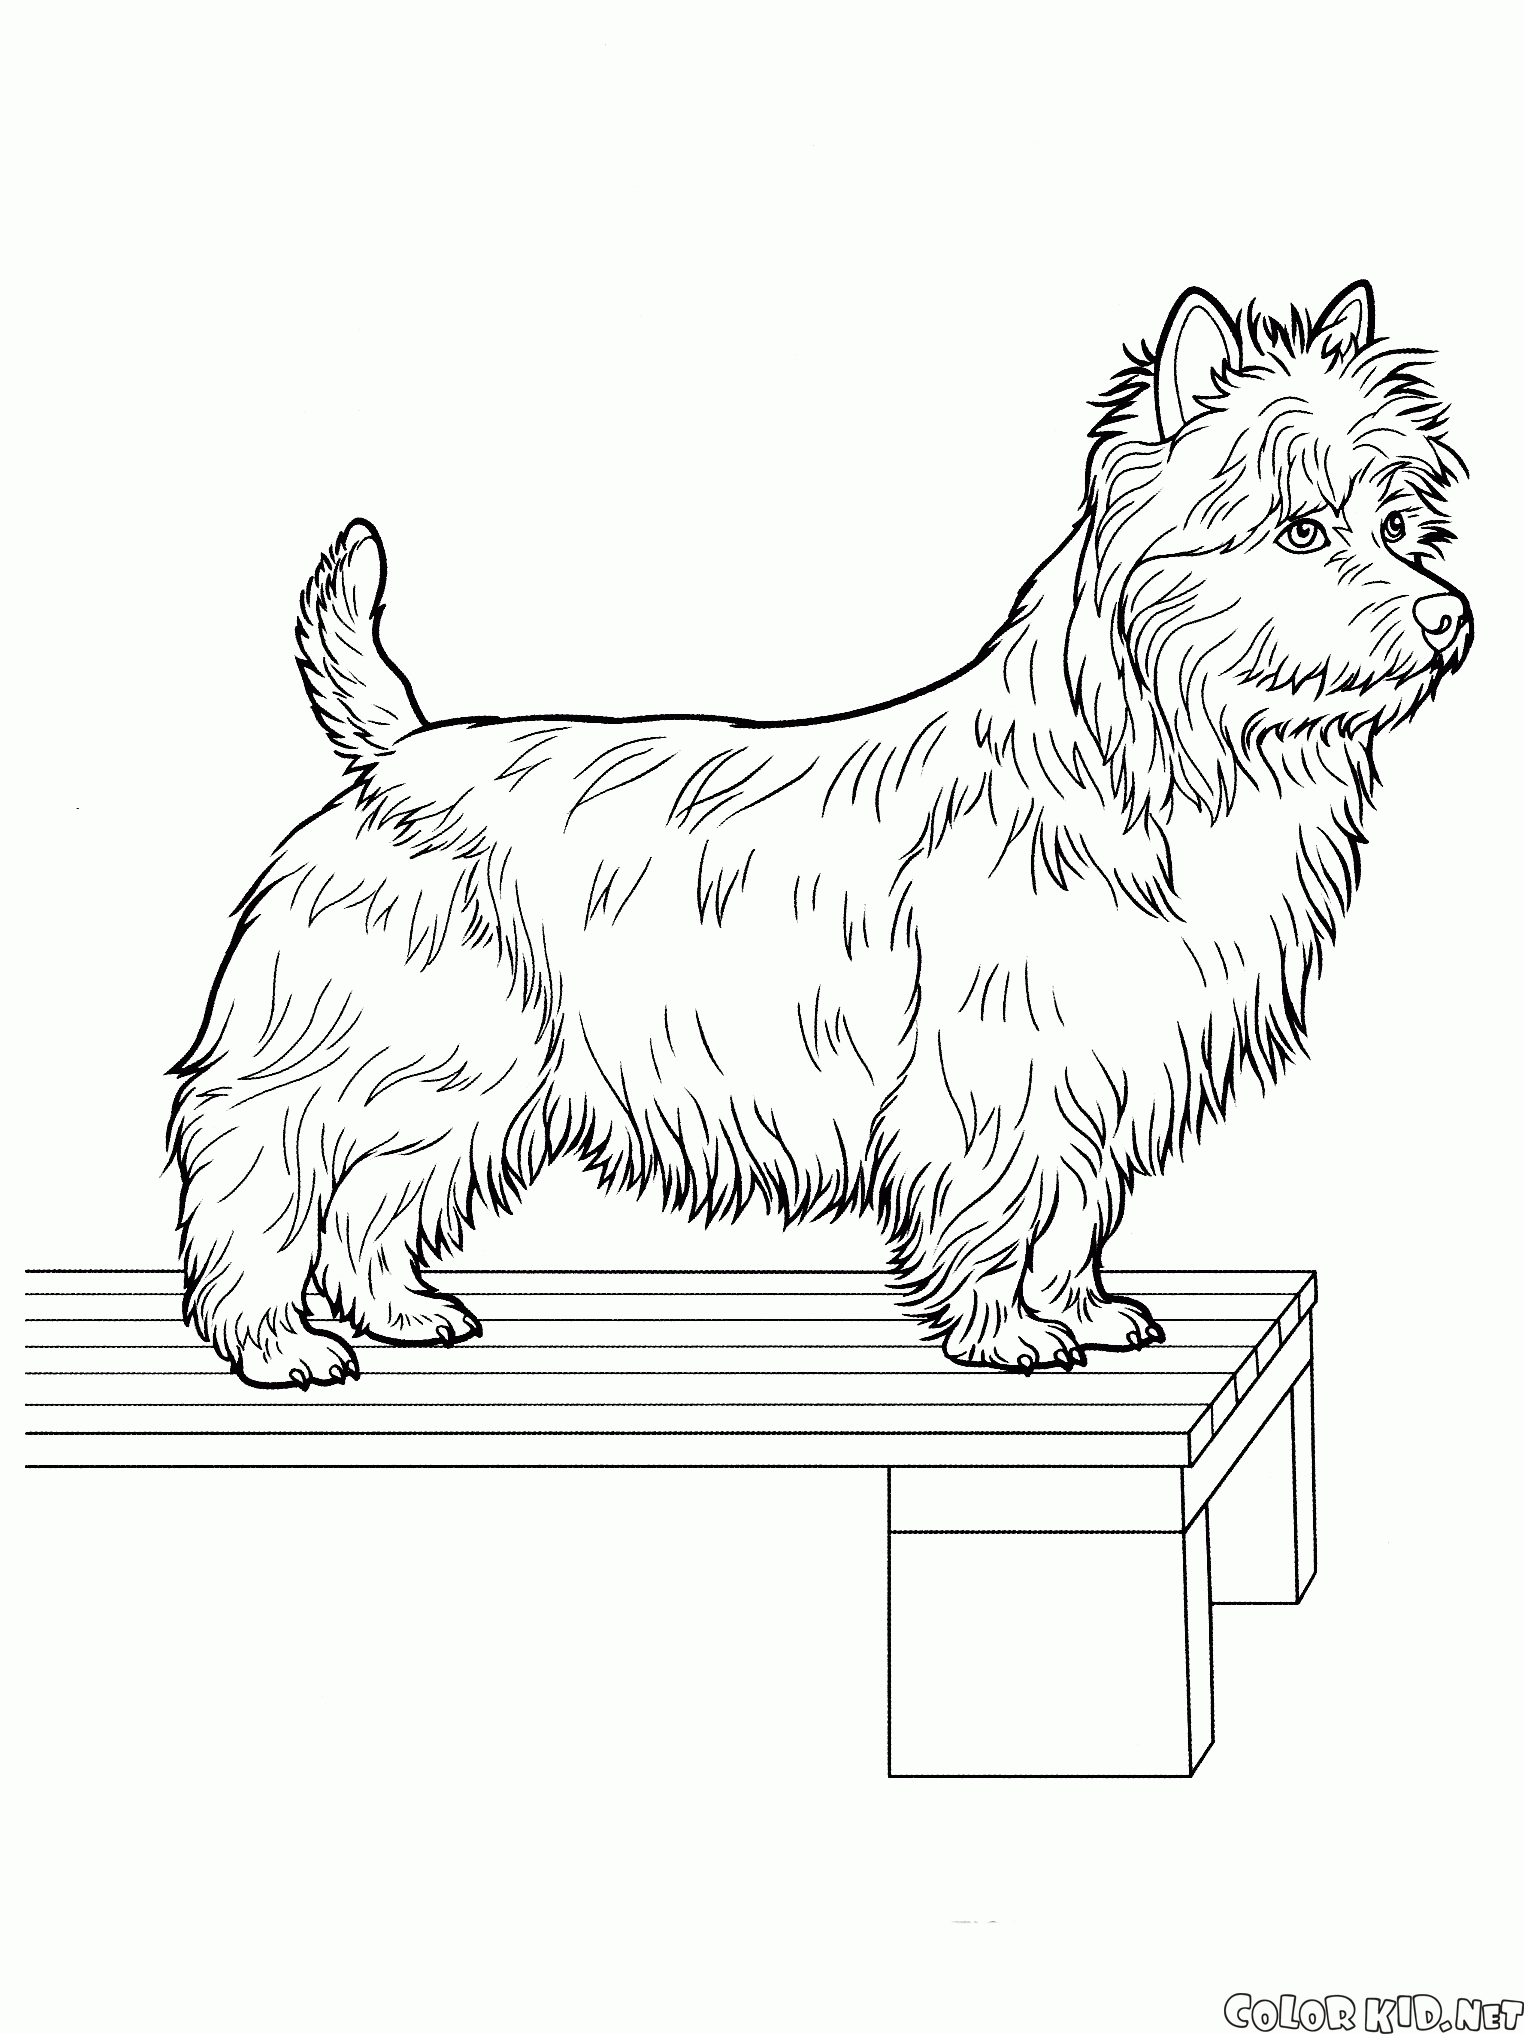 Coloring page - Yorkshire Terrier